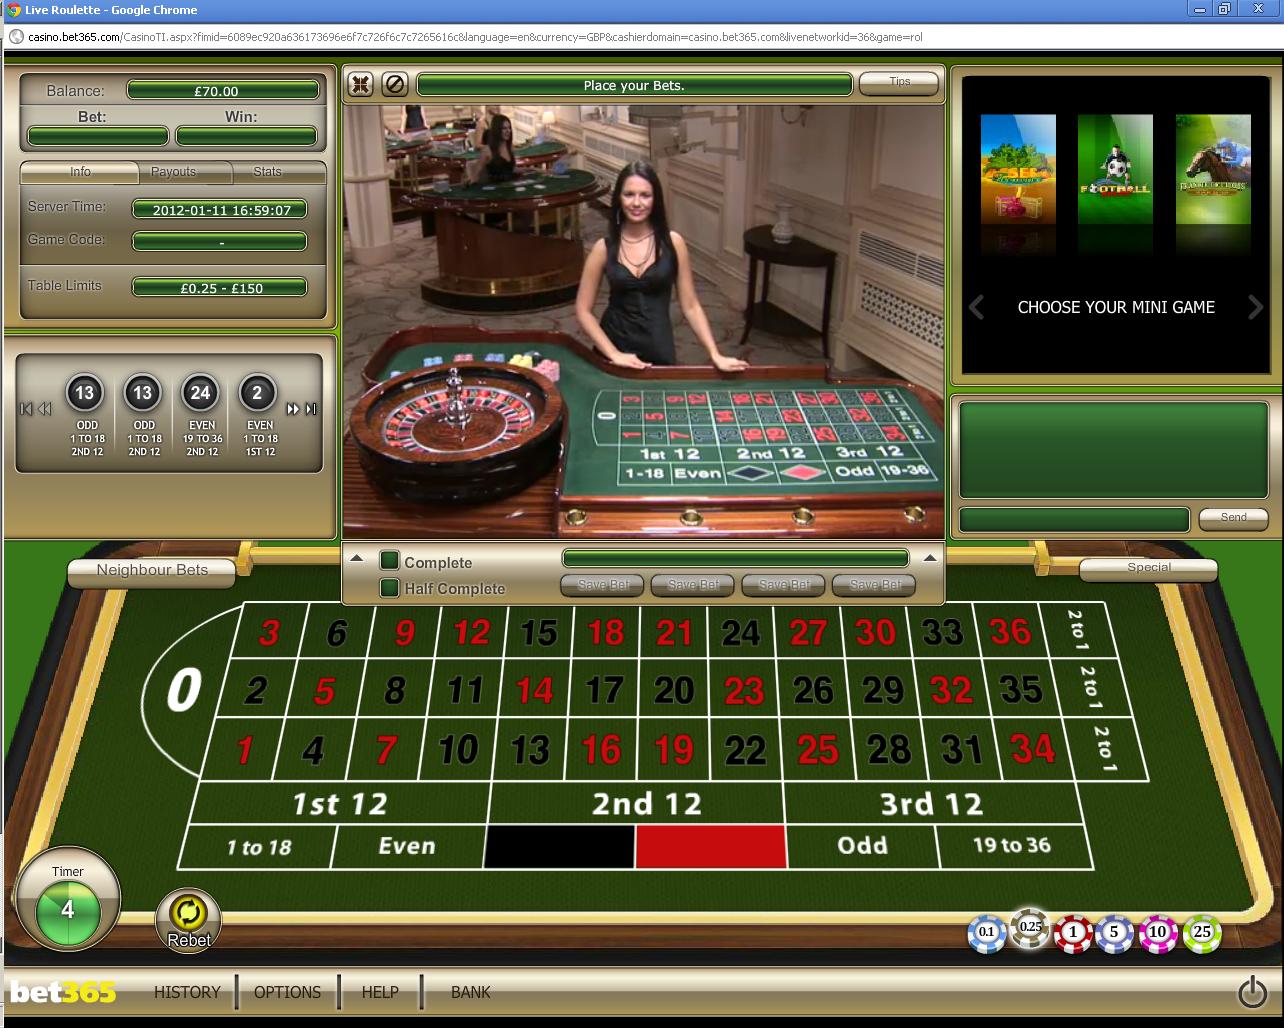 3 playing online live roulette